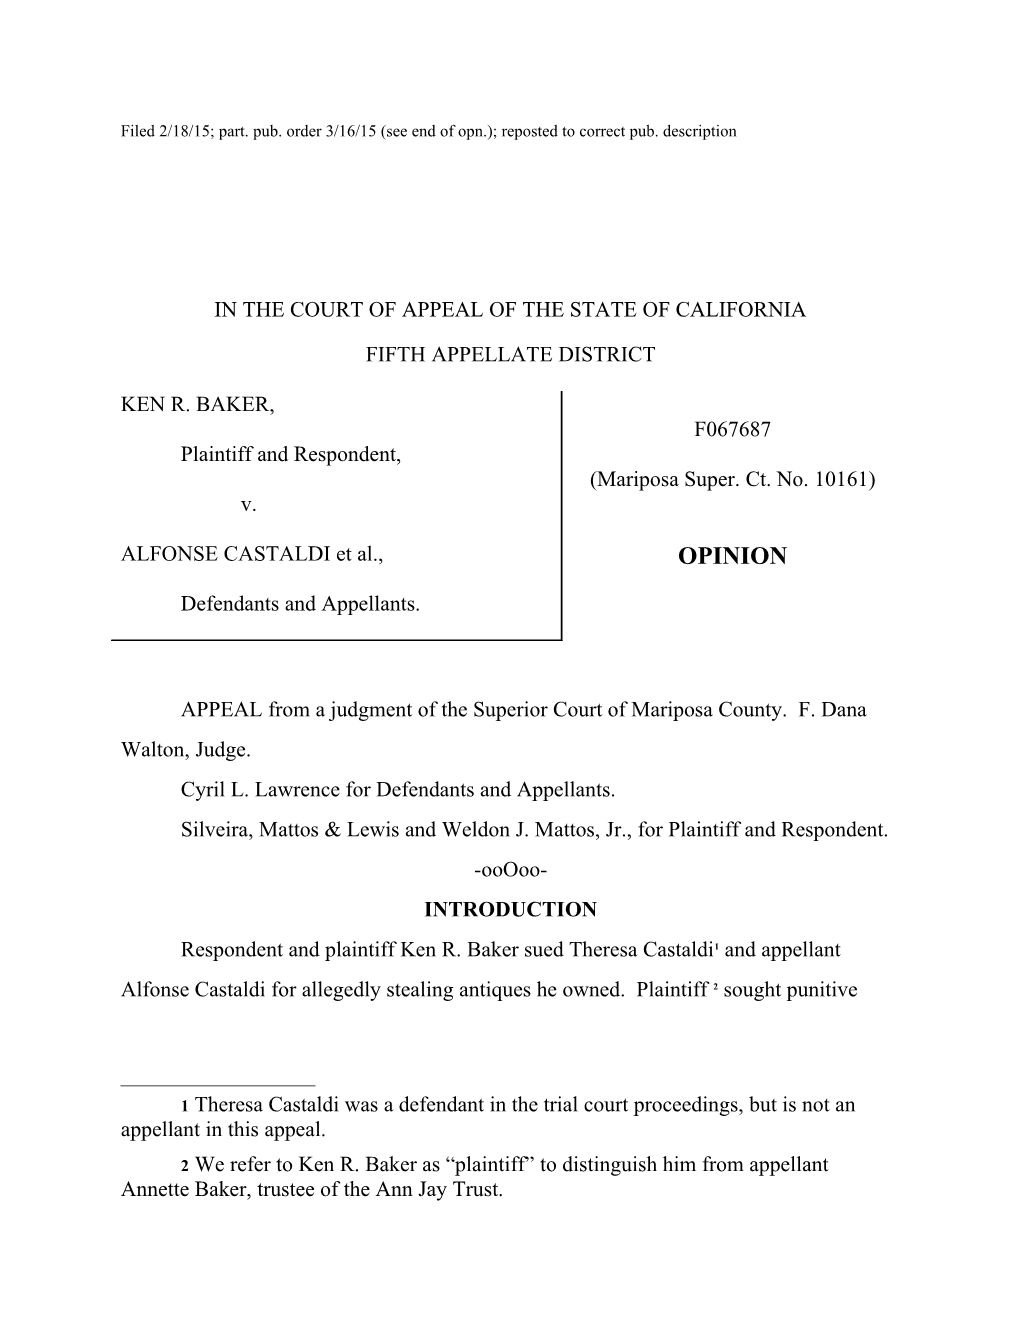 Filed 2/18/15; Part. Pub. Order 3/16/15 (See End of Opn.); Reposted to Correct Pub. Description